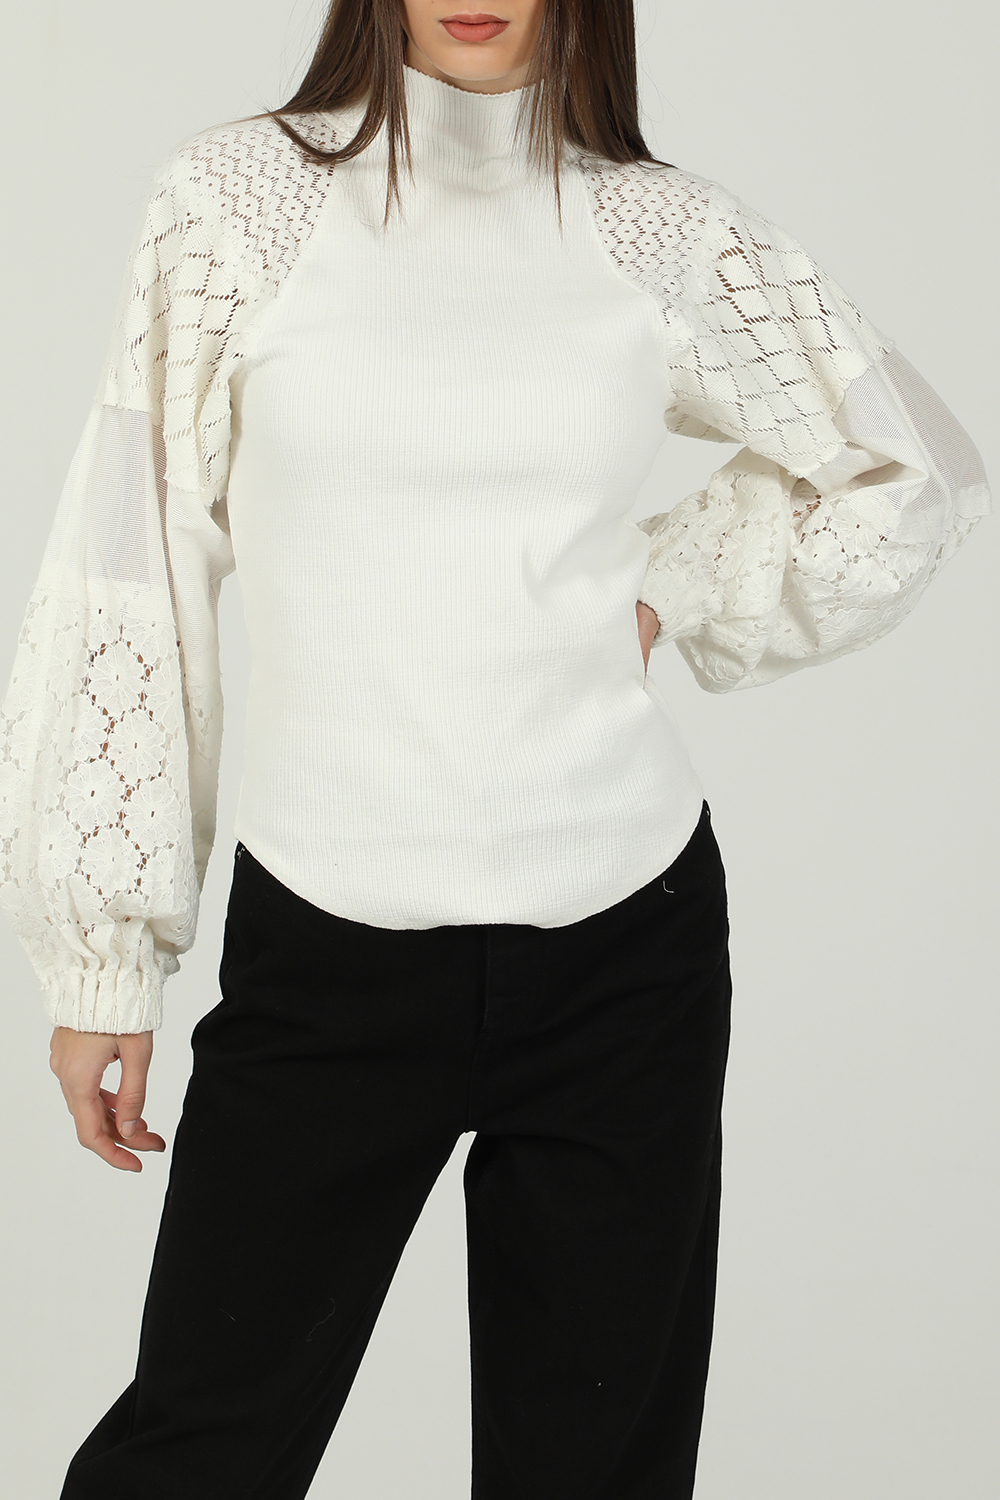 FREE PEOPLE COLLECTION – Γυναικεία μπλούζα FREE PEOPLE off white 1825861.0-00M6